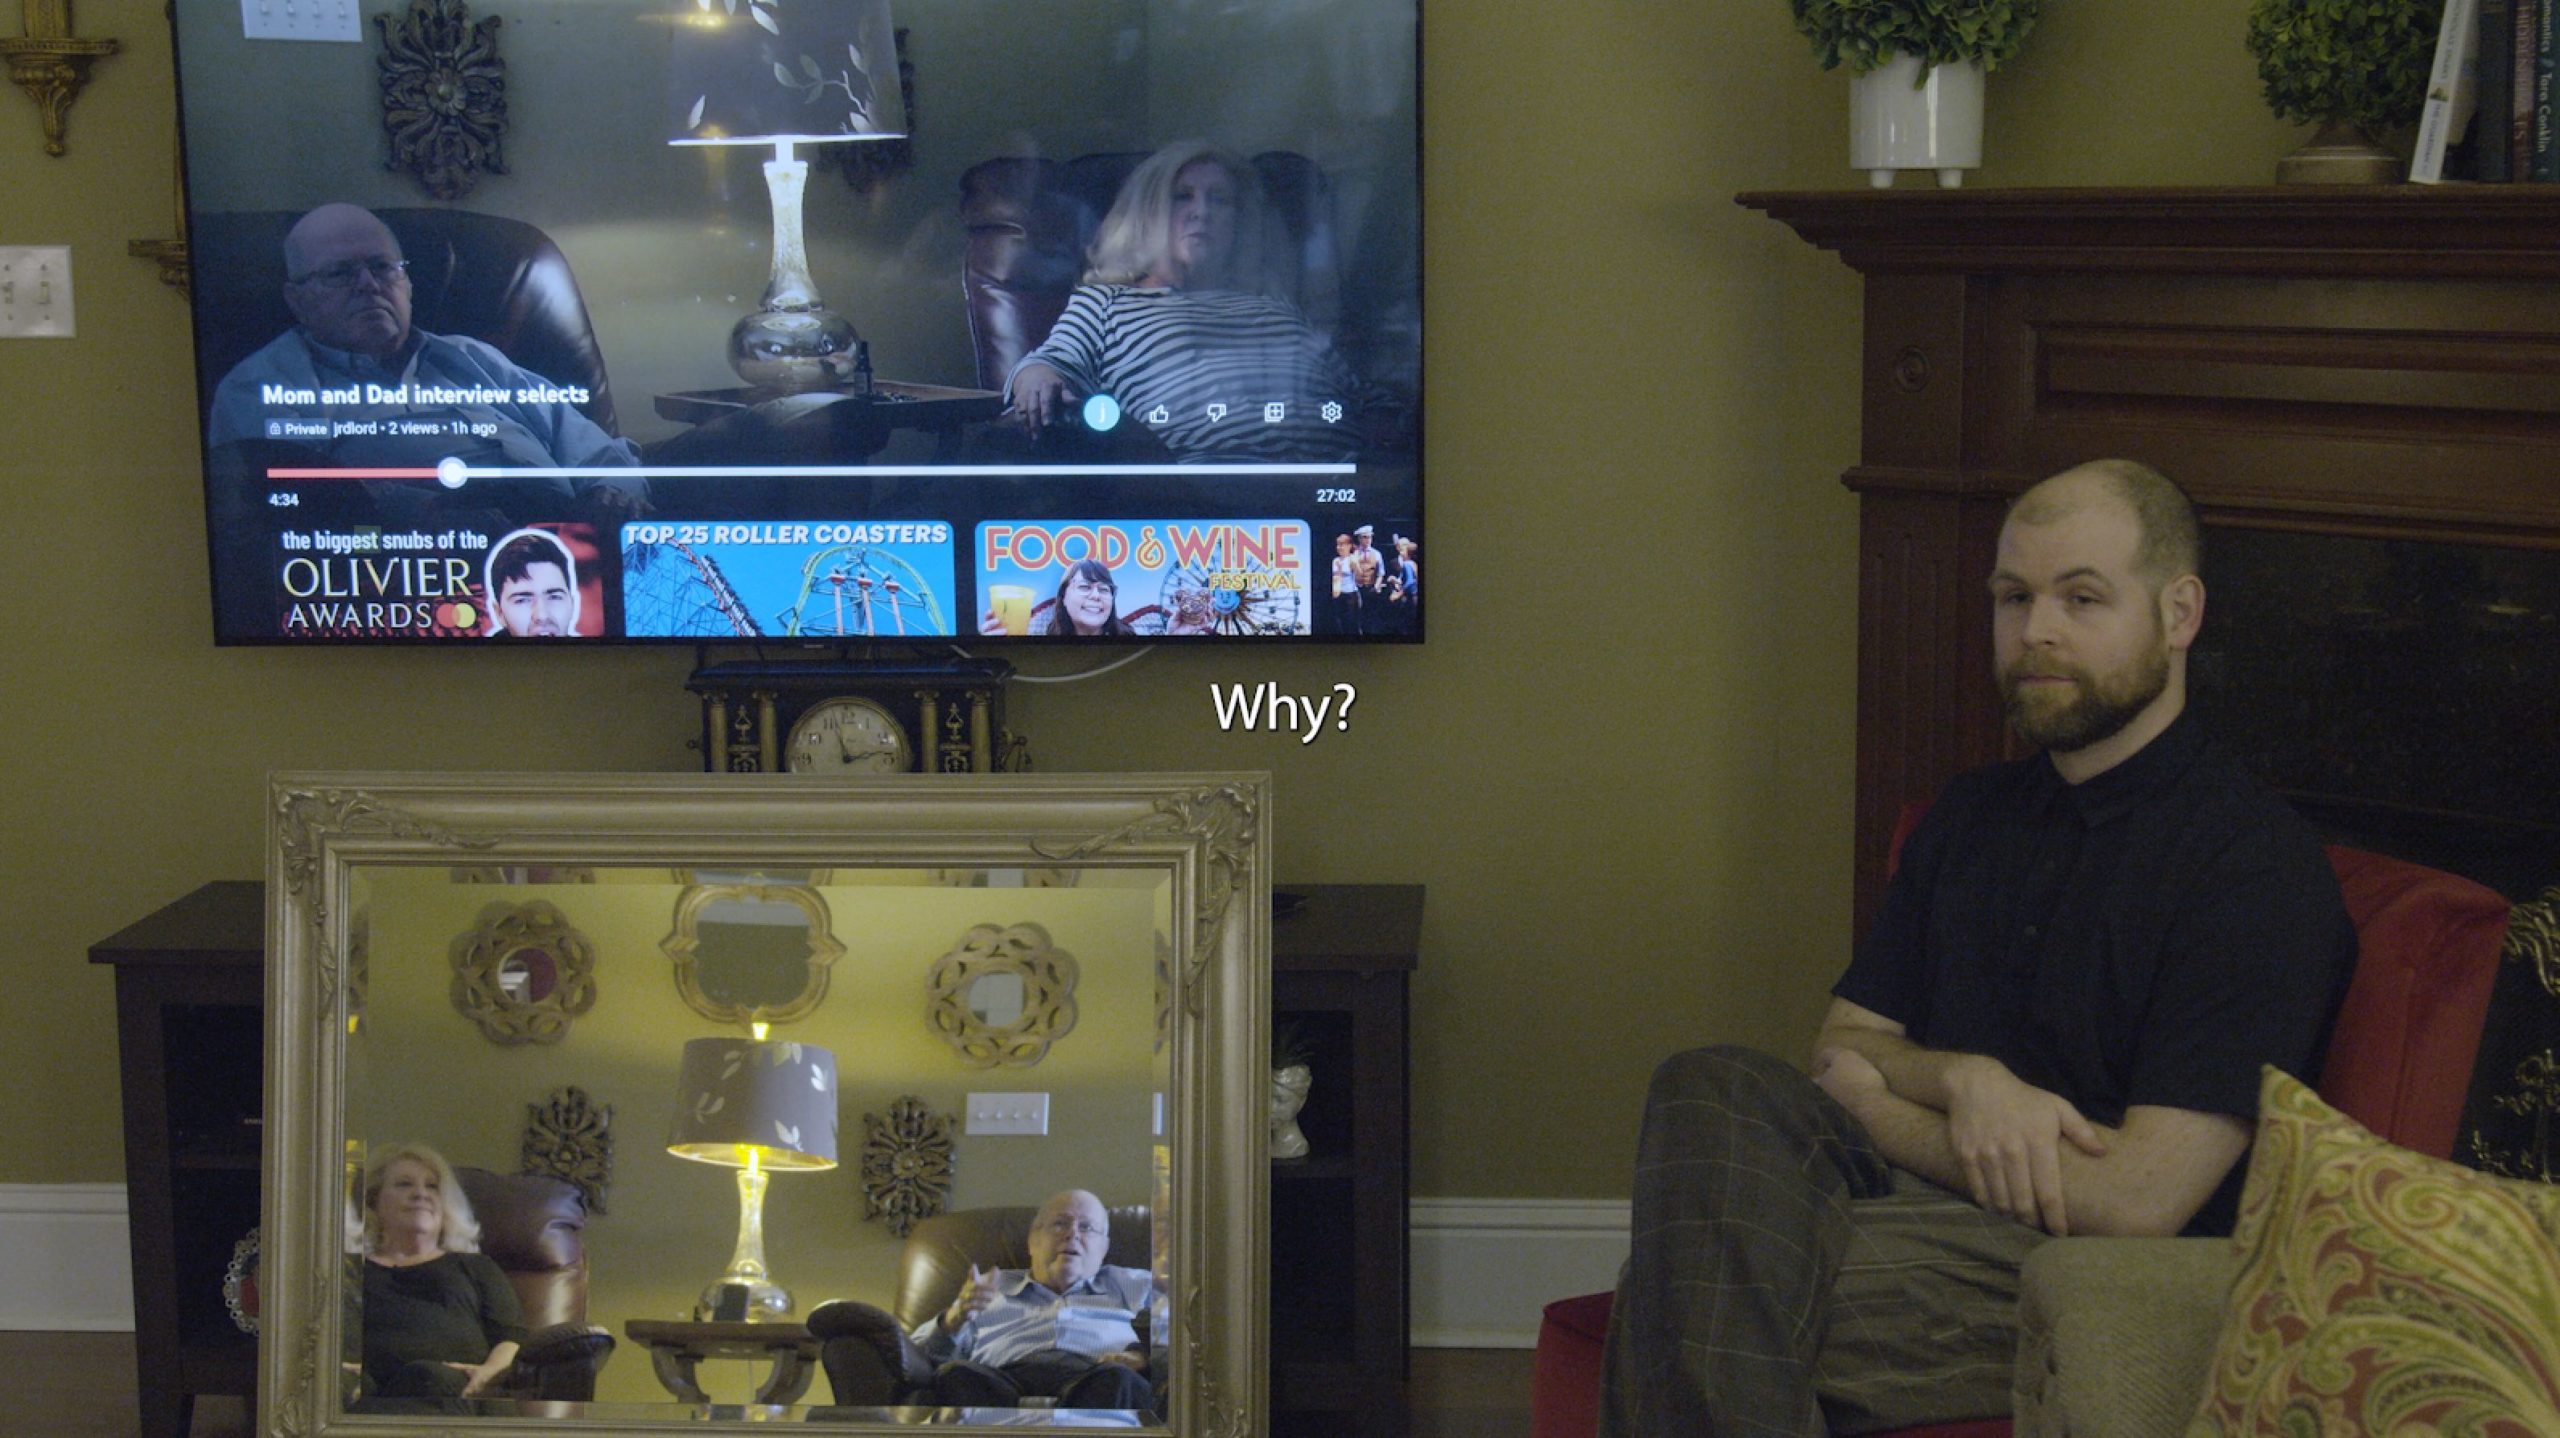 A still from the film Voice of Democracy shows a dim living room, in which a tv hangs on the wall. The tv displays two older white people, the filmmaker's parents, sitting with a gold lamp in between them. The filmmaker's father looks angry and their mother looks concerned. The tv image is paused on a Youtube window, which reads: "Mom and Dad interview selects," below which a series of other videos are recommended including "The Biggest Snubs of the Olivier Awards," "Top 25 Roller Coasters," and "Food & Wine Festival." Reflected in a mirror below the television are the filmmaker's parents sitting in the same set-up as their image on the television, with the same gold lamp between them. They are looking across the room at the filmmaker, a 30-something white person with a buzzcut and a beard, who looks back at them with their arms folded and legs crossed, with a serious and sympathetic look. Their father is pointing at the television, saying something. In the center of the image, between the mirror and the television, is a caption that reads, "Why?"